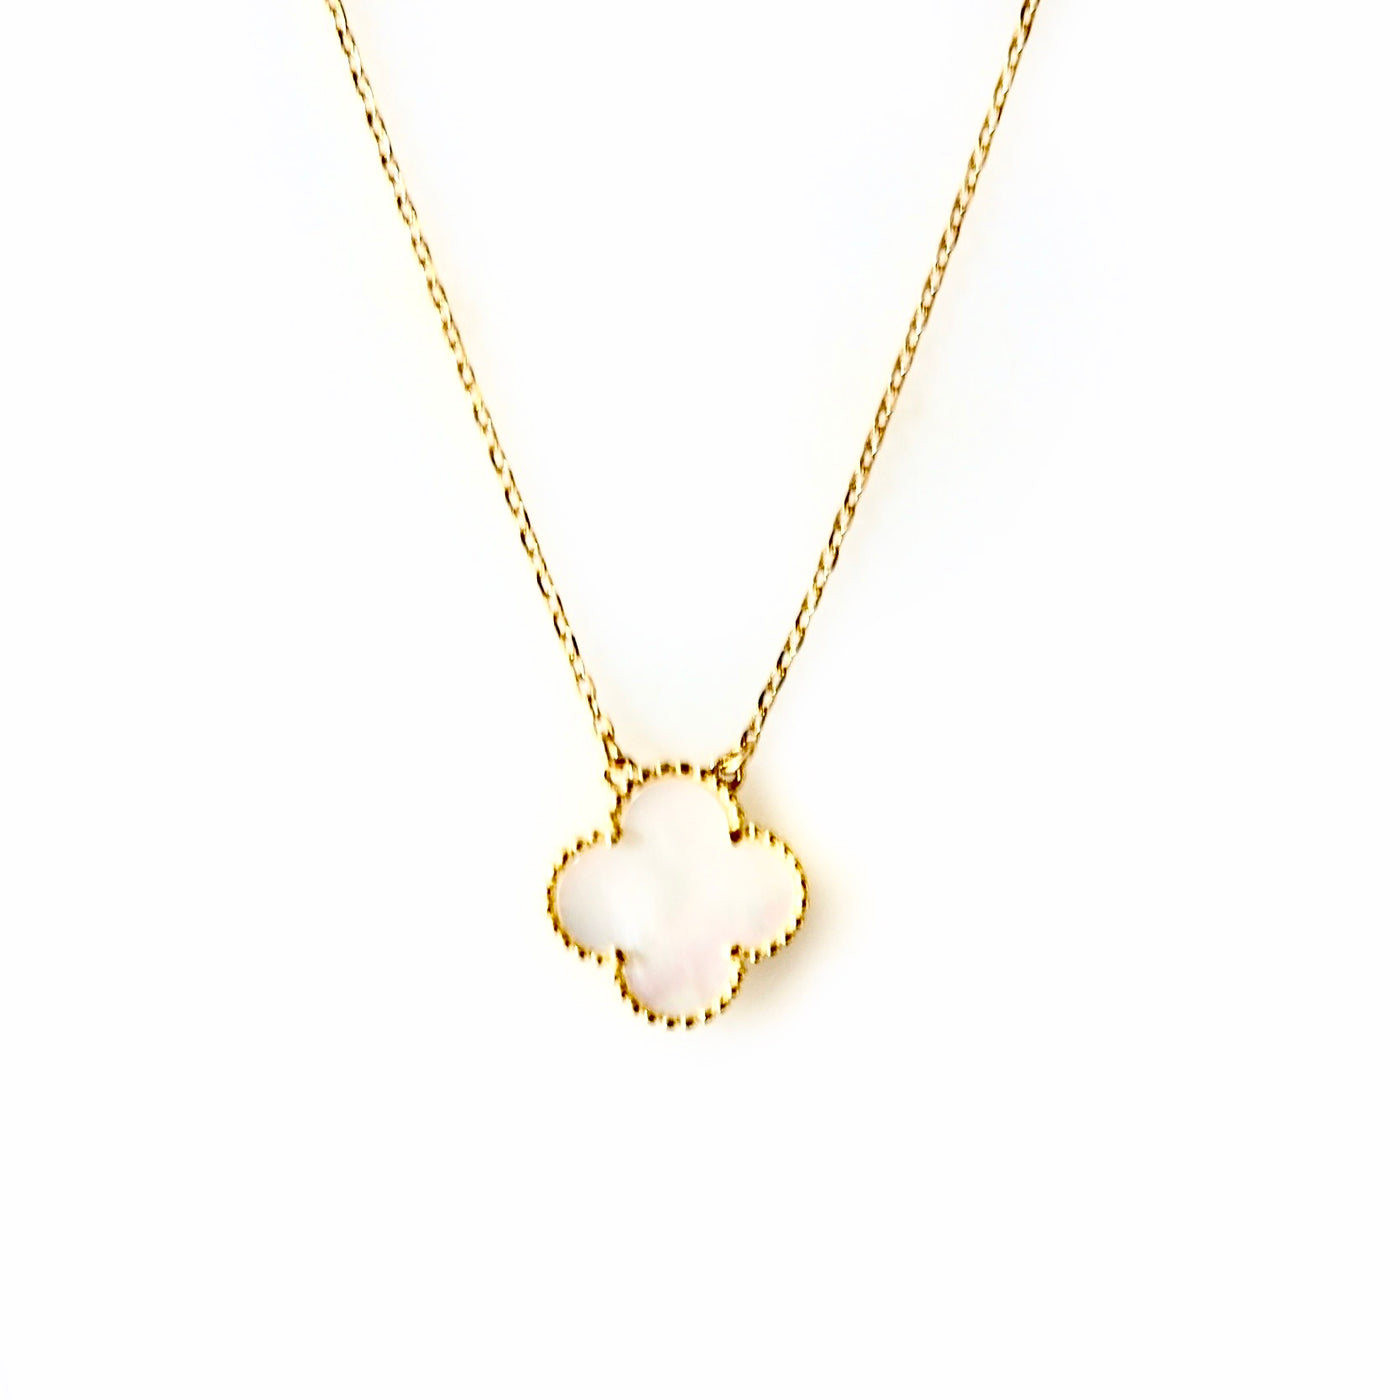 mother of pearl clover necklace